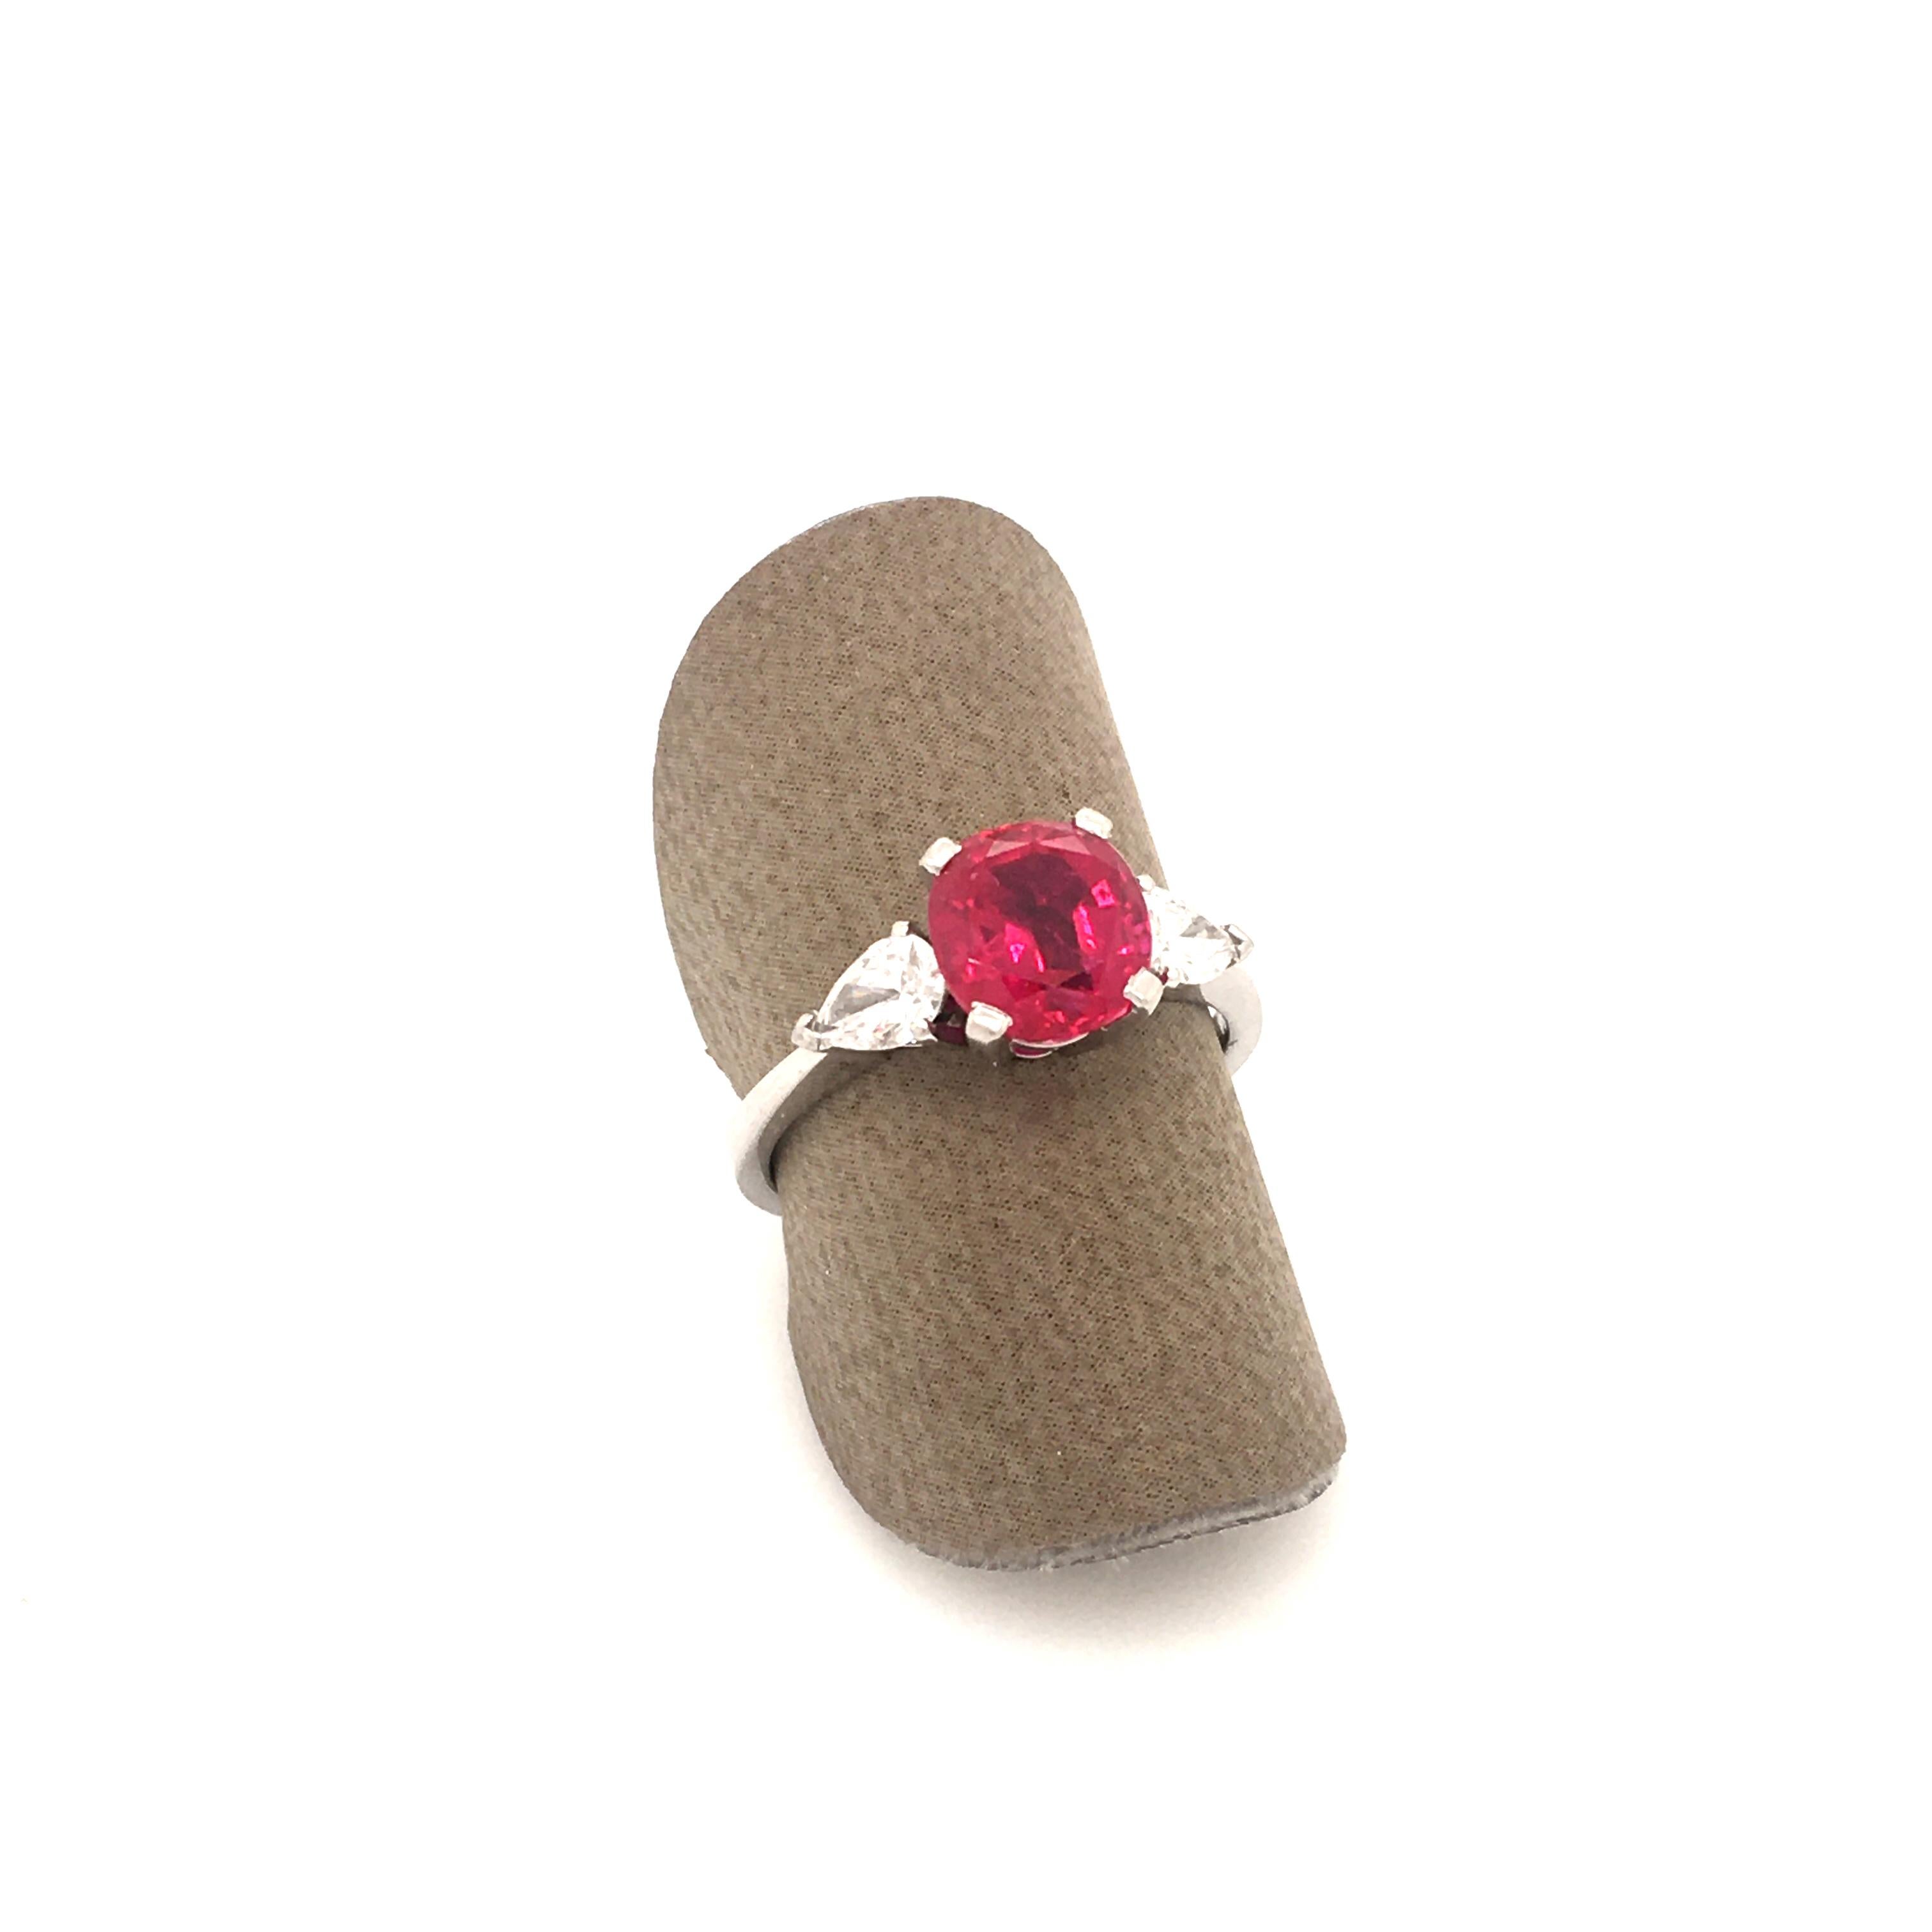 Women's or Men's Superb Gubelin Ring with a 2.35 Carat Untreated Burmese Ruby and Diamonds